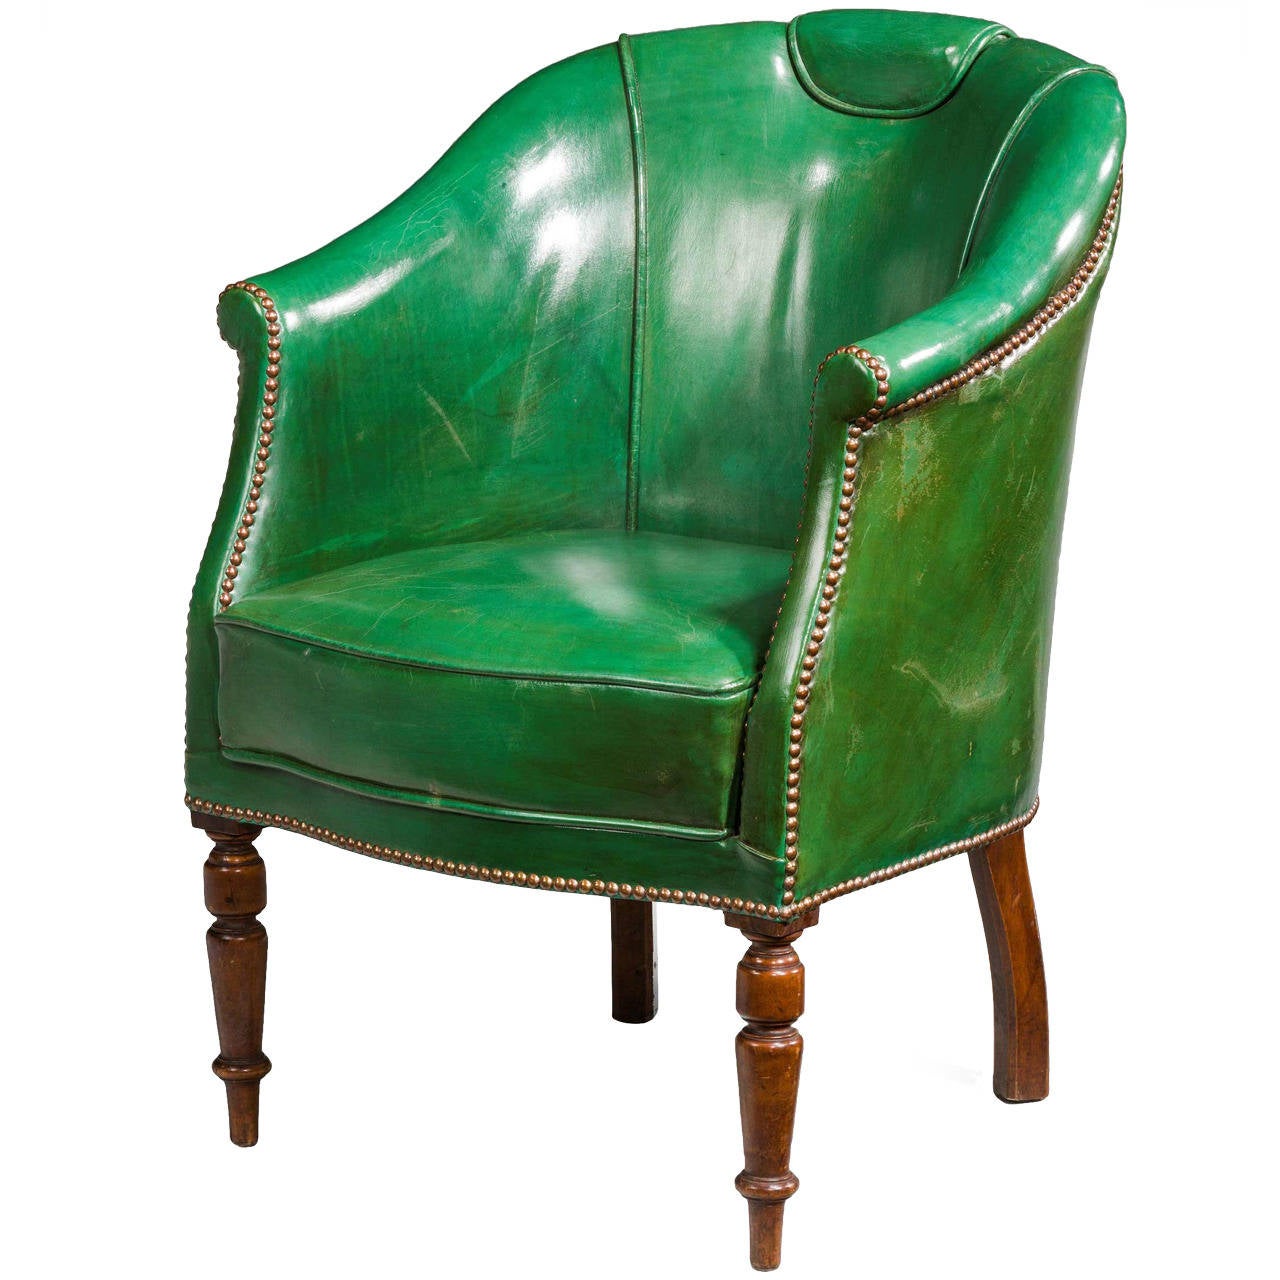 19th Century Green Leather Chair For Sale at 1stdibs